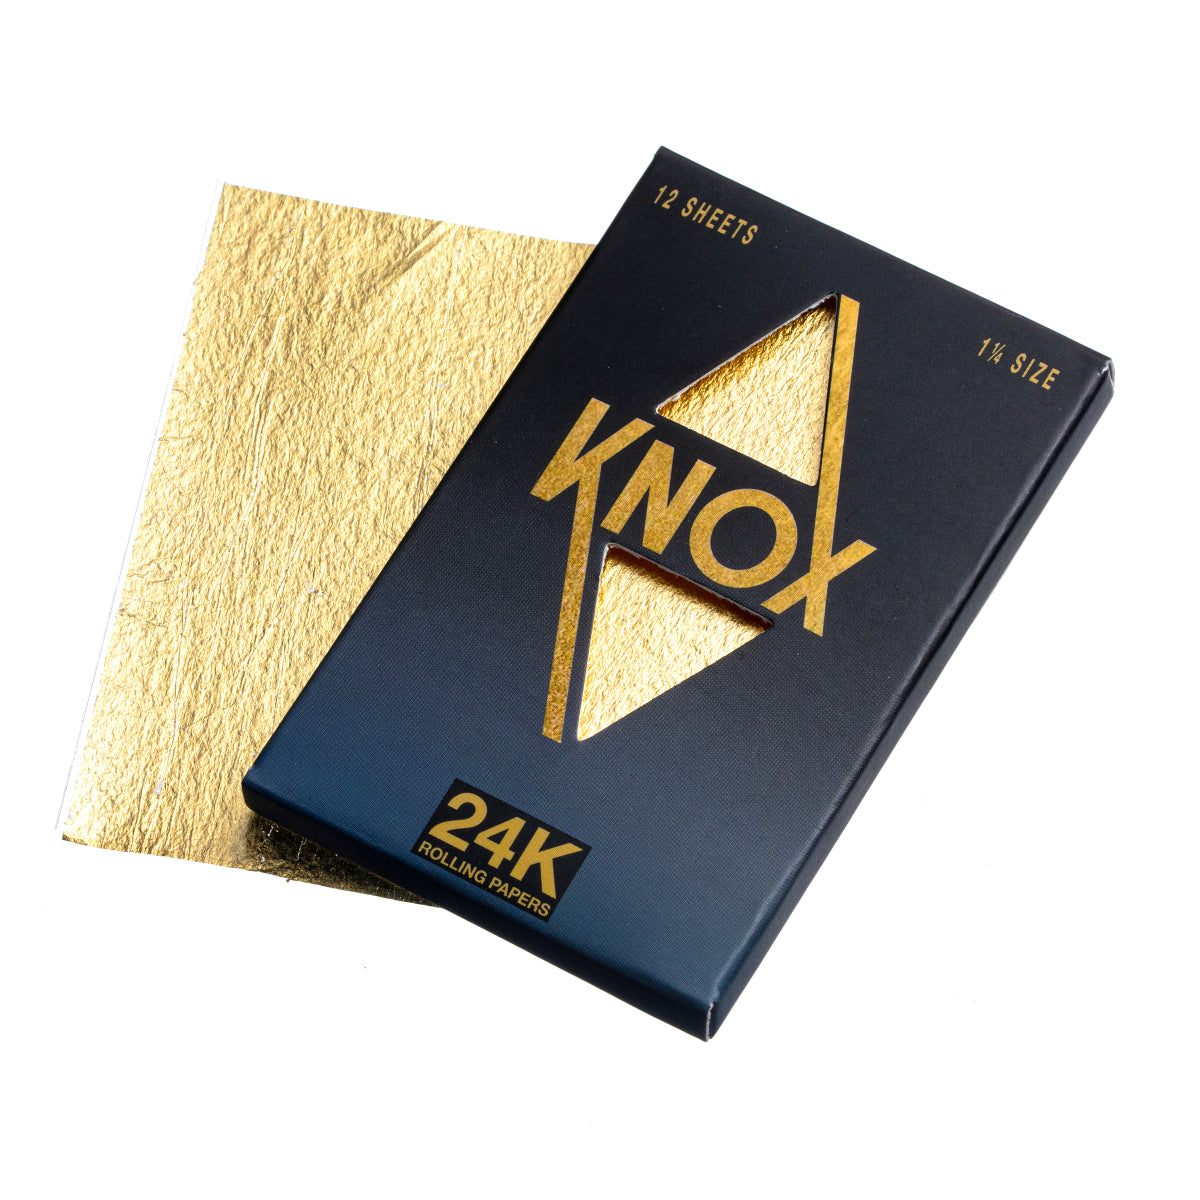 Knox 24K Gold Rolling Paper Standard Size 12 Sheets in Pack - (1 Count)